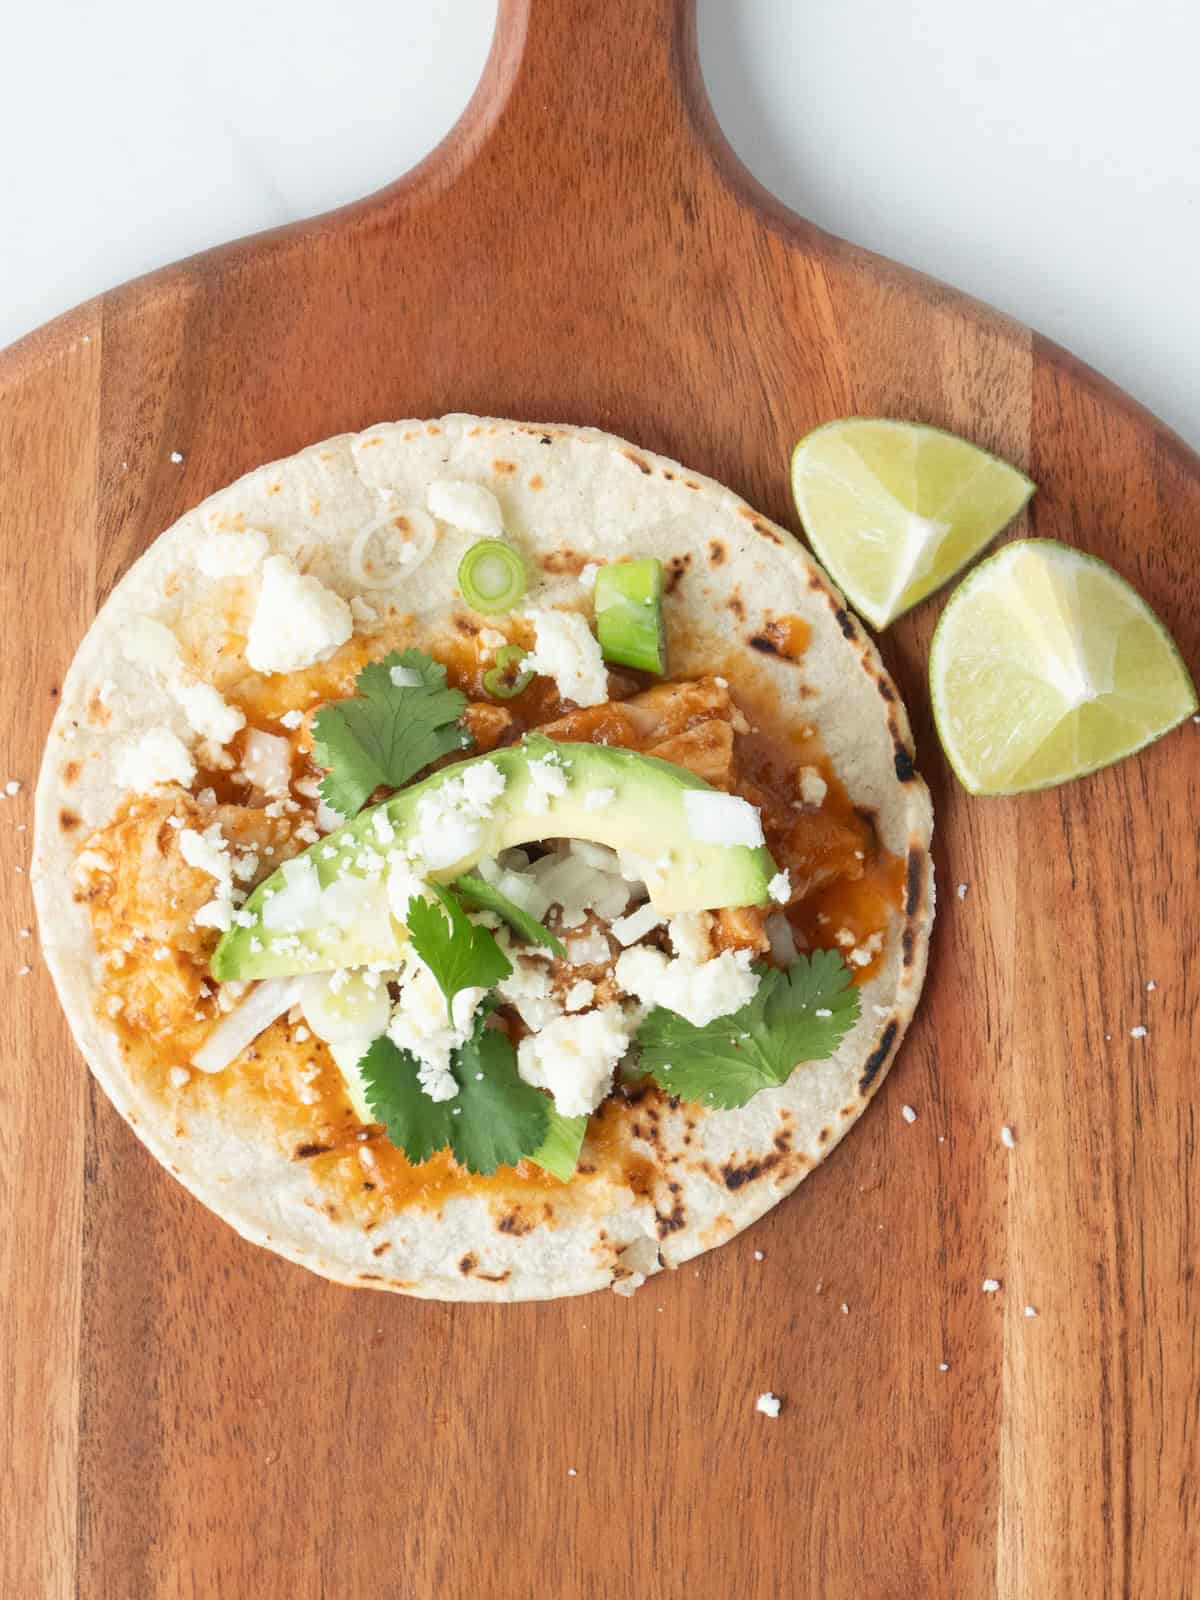 A wooden board with a lightly charred tortilla with chicken tinga topped with cilantro, chopped onions, sliced scalions, avocado and crumbled cotija cheese added along with lime wedges on the side.